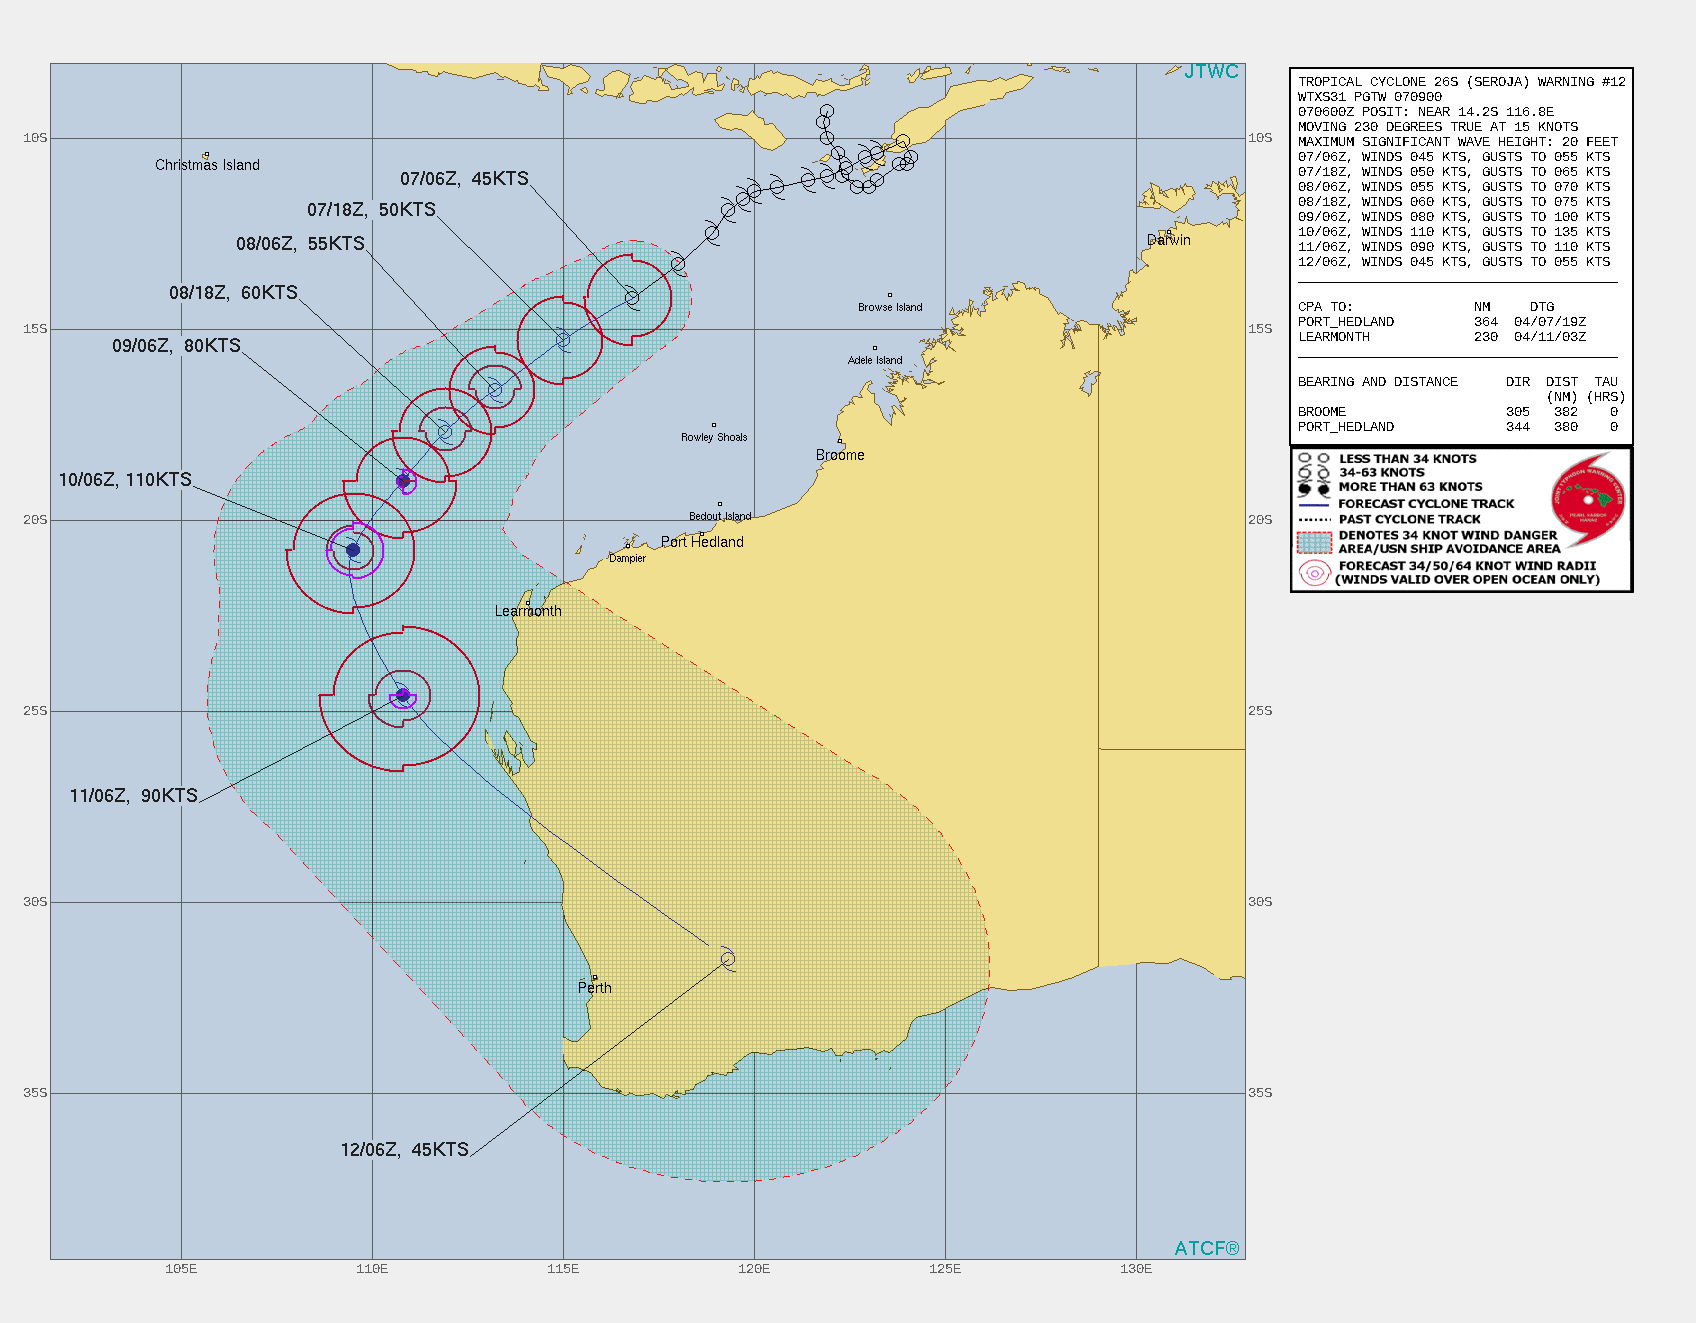 27S(SEROJA). WARNING 12 ISSUED AT 07/09UTC. THE SYSTEM REMAINS COCOONED IN A MARGINALLY  SUPPORTIVE ENVIRONMENT CHARACTERIZED BY MODERATE (15-20 KTS)  EASTERLY VERTICAL WIND SHEAR(VWS) OFFSET BY DIFFLUENT FLOW ALOFT, THOUGH THERE IS NO  DISTINCT OUTFLOW CHANNEL AT PRESENT. TC 26S IS FORECAST TO CONTINUE  TRACKING SOUTHWESTWARD ALONG THE NORTHWEST PERIPHERY OF A DEEP-LAYER  SUBTROPICAL RIDGE (STR) CENTERED OVER WESTERN AUSTRALIA THROUGH 72H,  BEFORE ROUNDING THE RIDGE AXIS NEAR 72H, AND THEN ACCELERATING  SOUTHEASTWARD THROUGH 120H. THE SYSTEM IS EXPECTED TO MAKE  LANDFALL SOUTH OF SHARK BAY NEAR 108H. SLOW INTENSIFICATION IS  FORECAST OVER THE NEXT 36 HOURS AS THE SYSTEM MOVES SLOWLY INTO A  GENERALLY MORE FAVORABLE ENVIRONMENT WITH INCREASED MOISTURE AND  DECREASED VWS. TC 26S IS FORECAST TO RAPIDLY INTENSIFY, FROM 60  KNOTS TO 110 KNOTS/US CAT 3 BETWEEN 48 AND 72H, AS IT APPROACHES THE RIDGE  AXIS, VWS DROPS TO THE 5-10 KNOT RANGE AND A COMPACT POINT SOURCE  DEVELOPS ALOFT OVER TOP OF THE SYSTEM. AFTER ROUNDING THE RIDGE AND  ACCELERATING SOUTHEASTWARD, INCREASING SHEAR, COOLER WATERS AND  ULTIMATELY LAND INTERACTION WILL LEAD TO RAPID WEAKENING THROUGH THE  REMAINDER OF THE FORECAST. THE SYSTEM IS EXPECTED TO BEGIN EXTRA- TROPICAL TRANSITION AFTER LANDFALL AS IT MOVES EAST OF PERTH. AT  THIS POINT, THE BINARY INTERACTION WITH TC 27S IS NOT EXPECTED TO  IMPACT THE TRACK FORECAST, BUT THERE REMAINS A LOW PROBABILITY OF A  SLIGHT WOBBLE FURTHER WEST IN THE MID-RANGE PORTION OF THE FORECAST  AS THE TWO SYSTEMS BEGIN TO INTERACT WITH ONE ANOTHER.